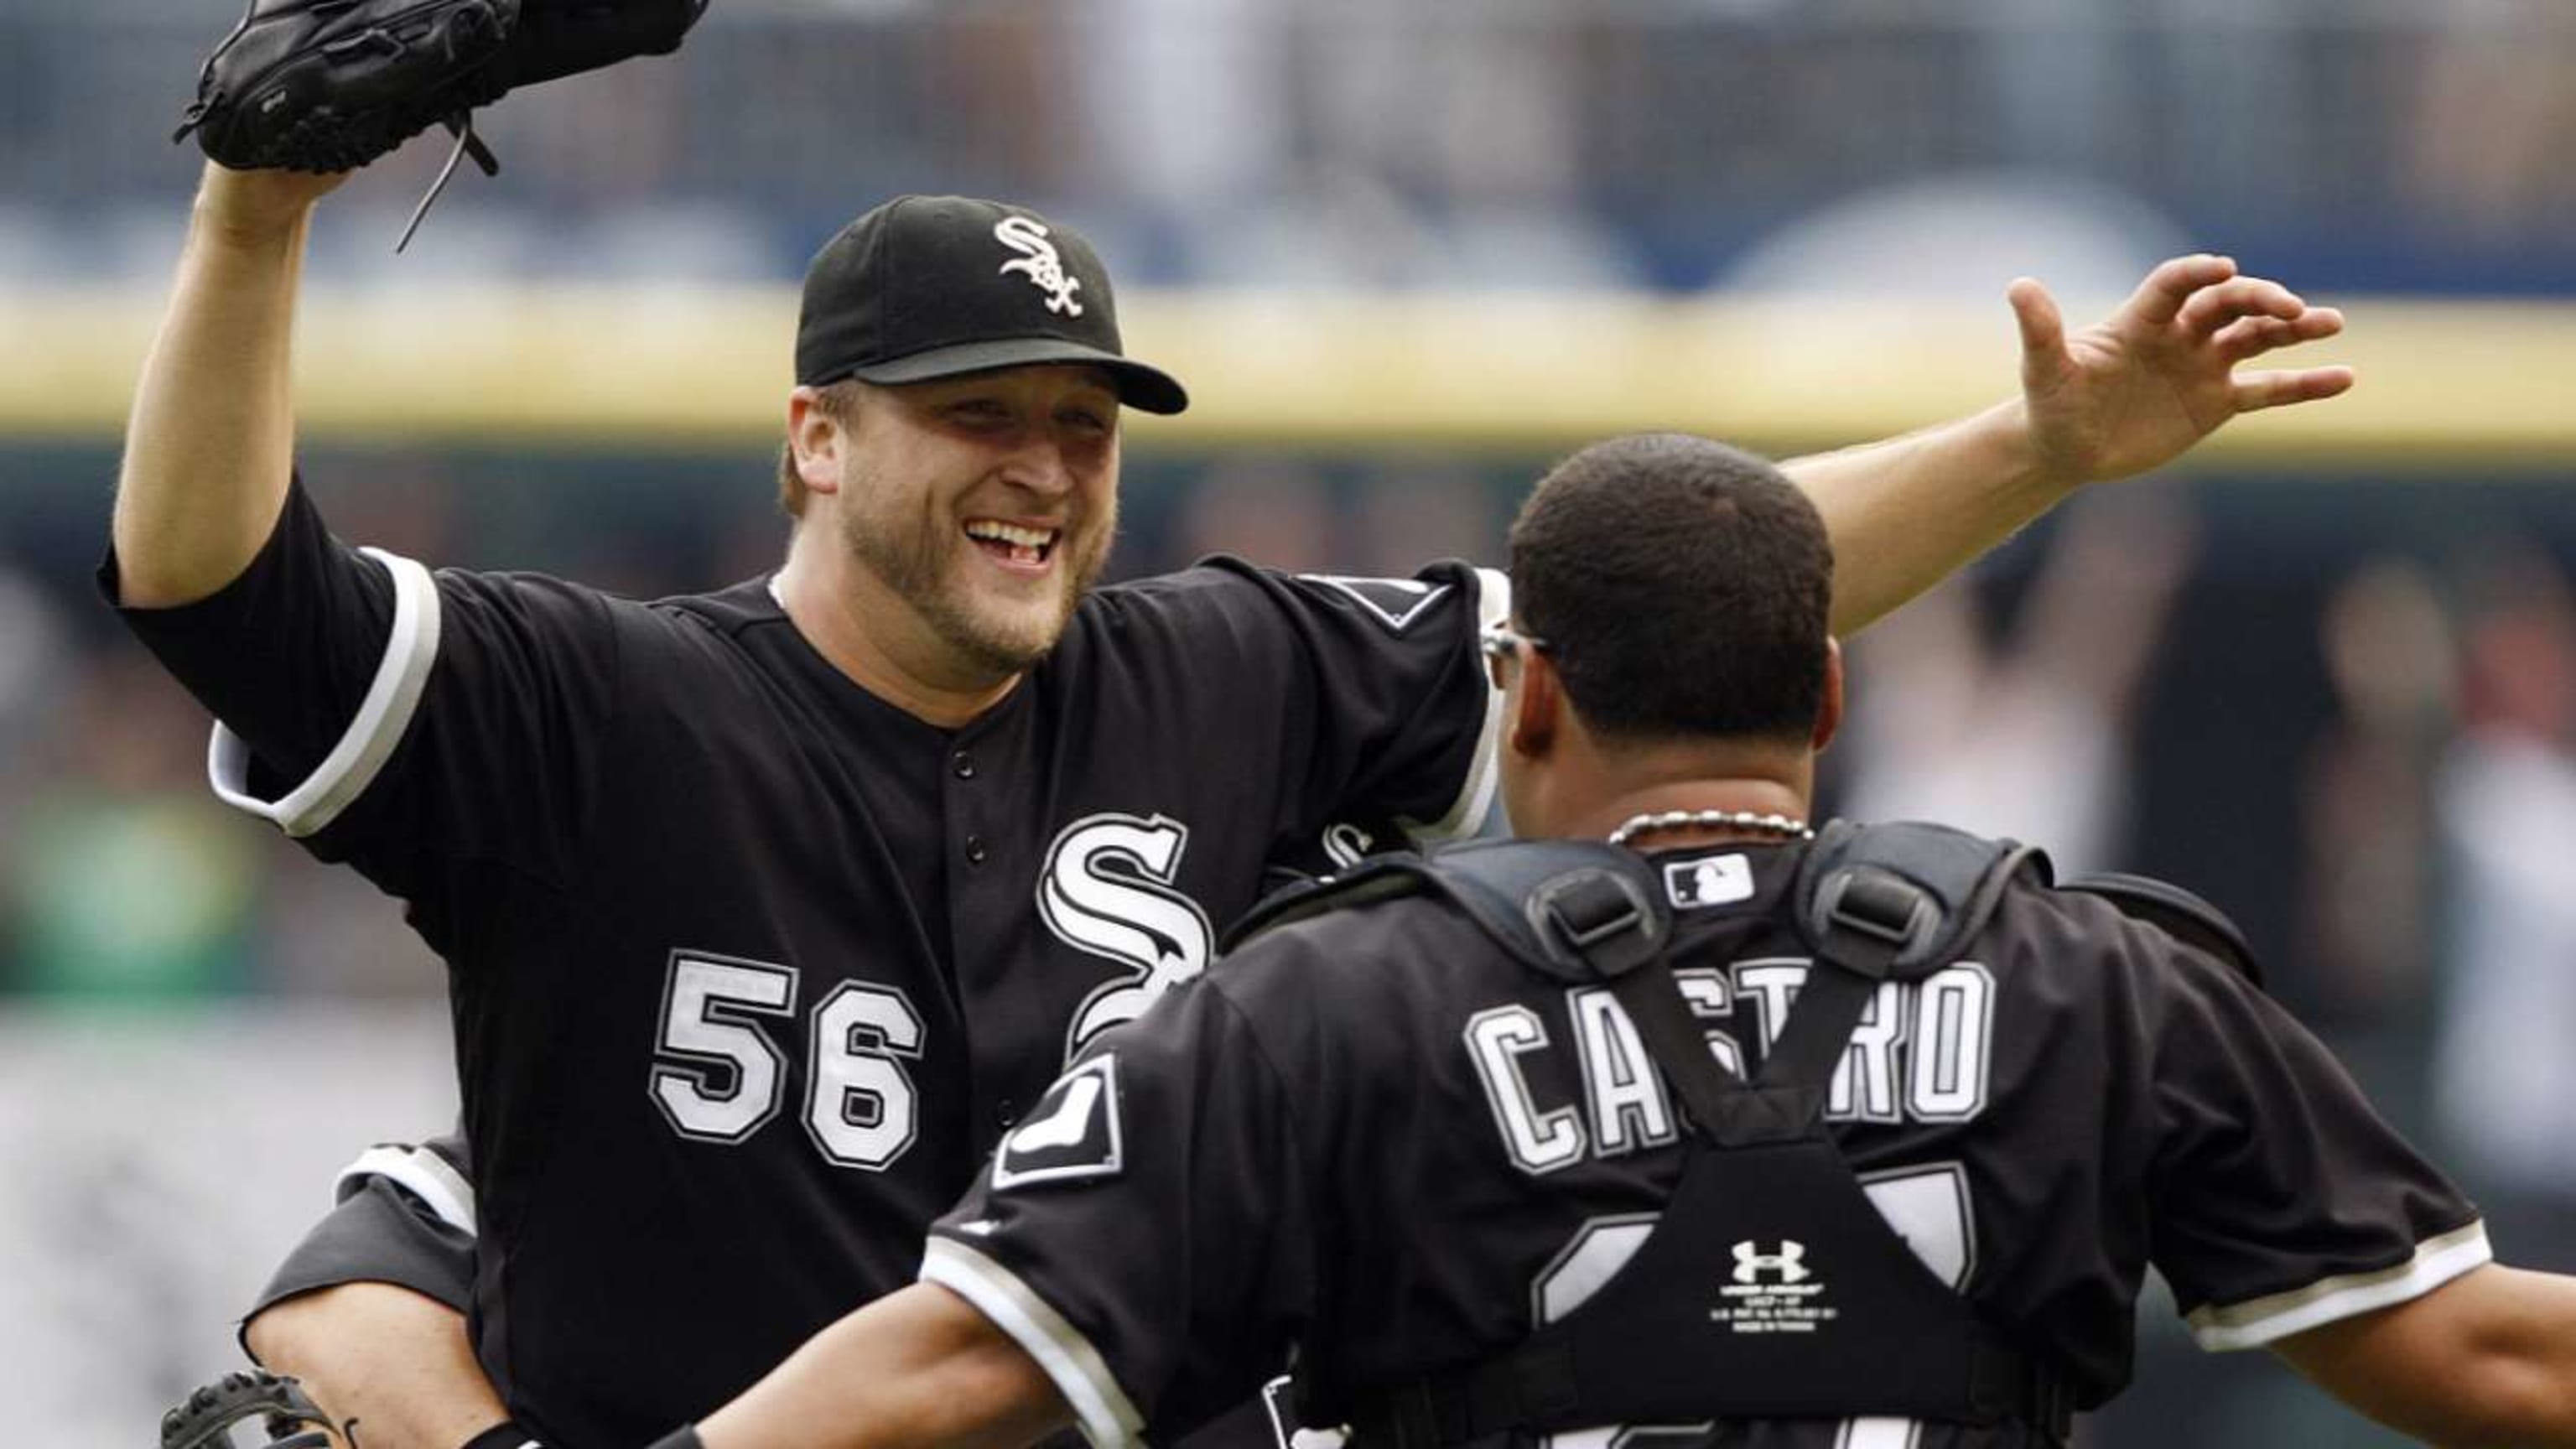 Buehrle's 27 outs